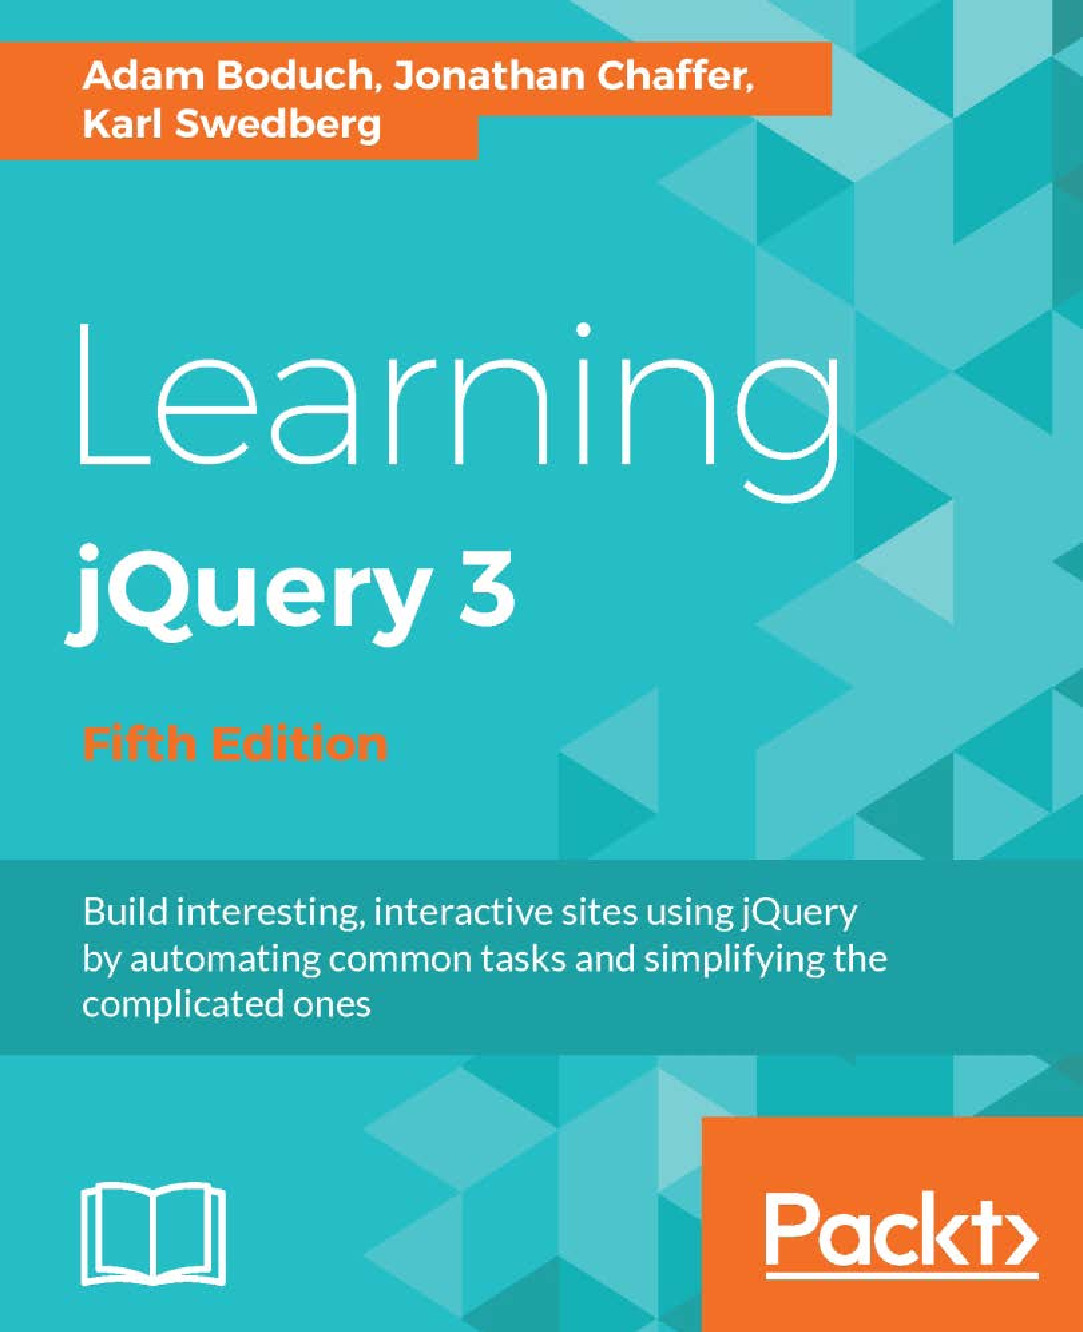 learningjquery3